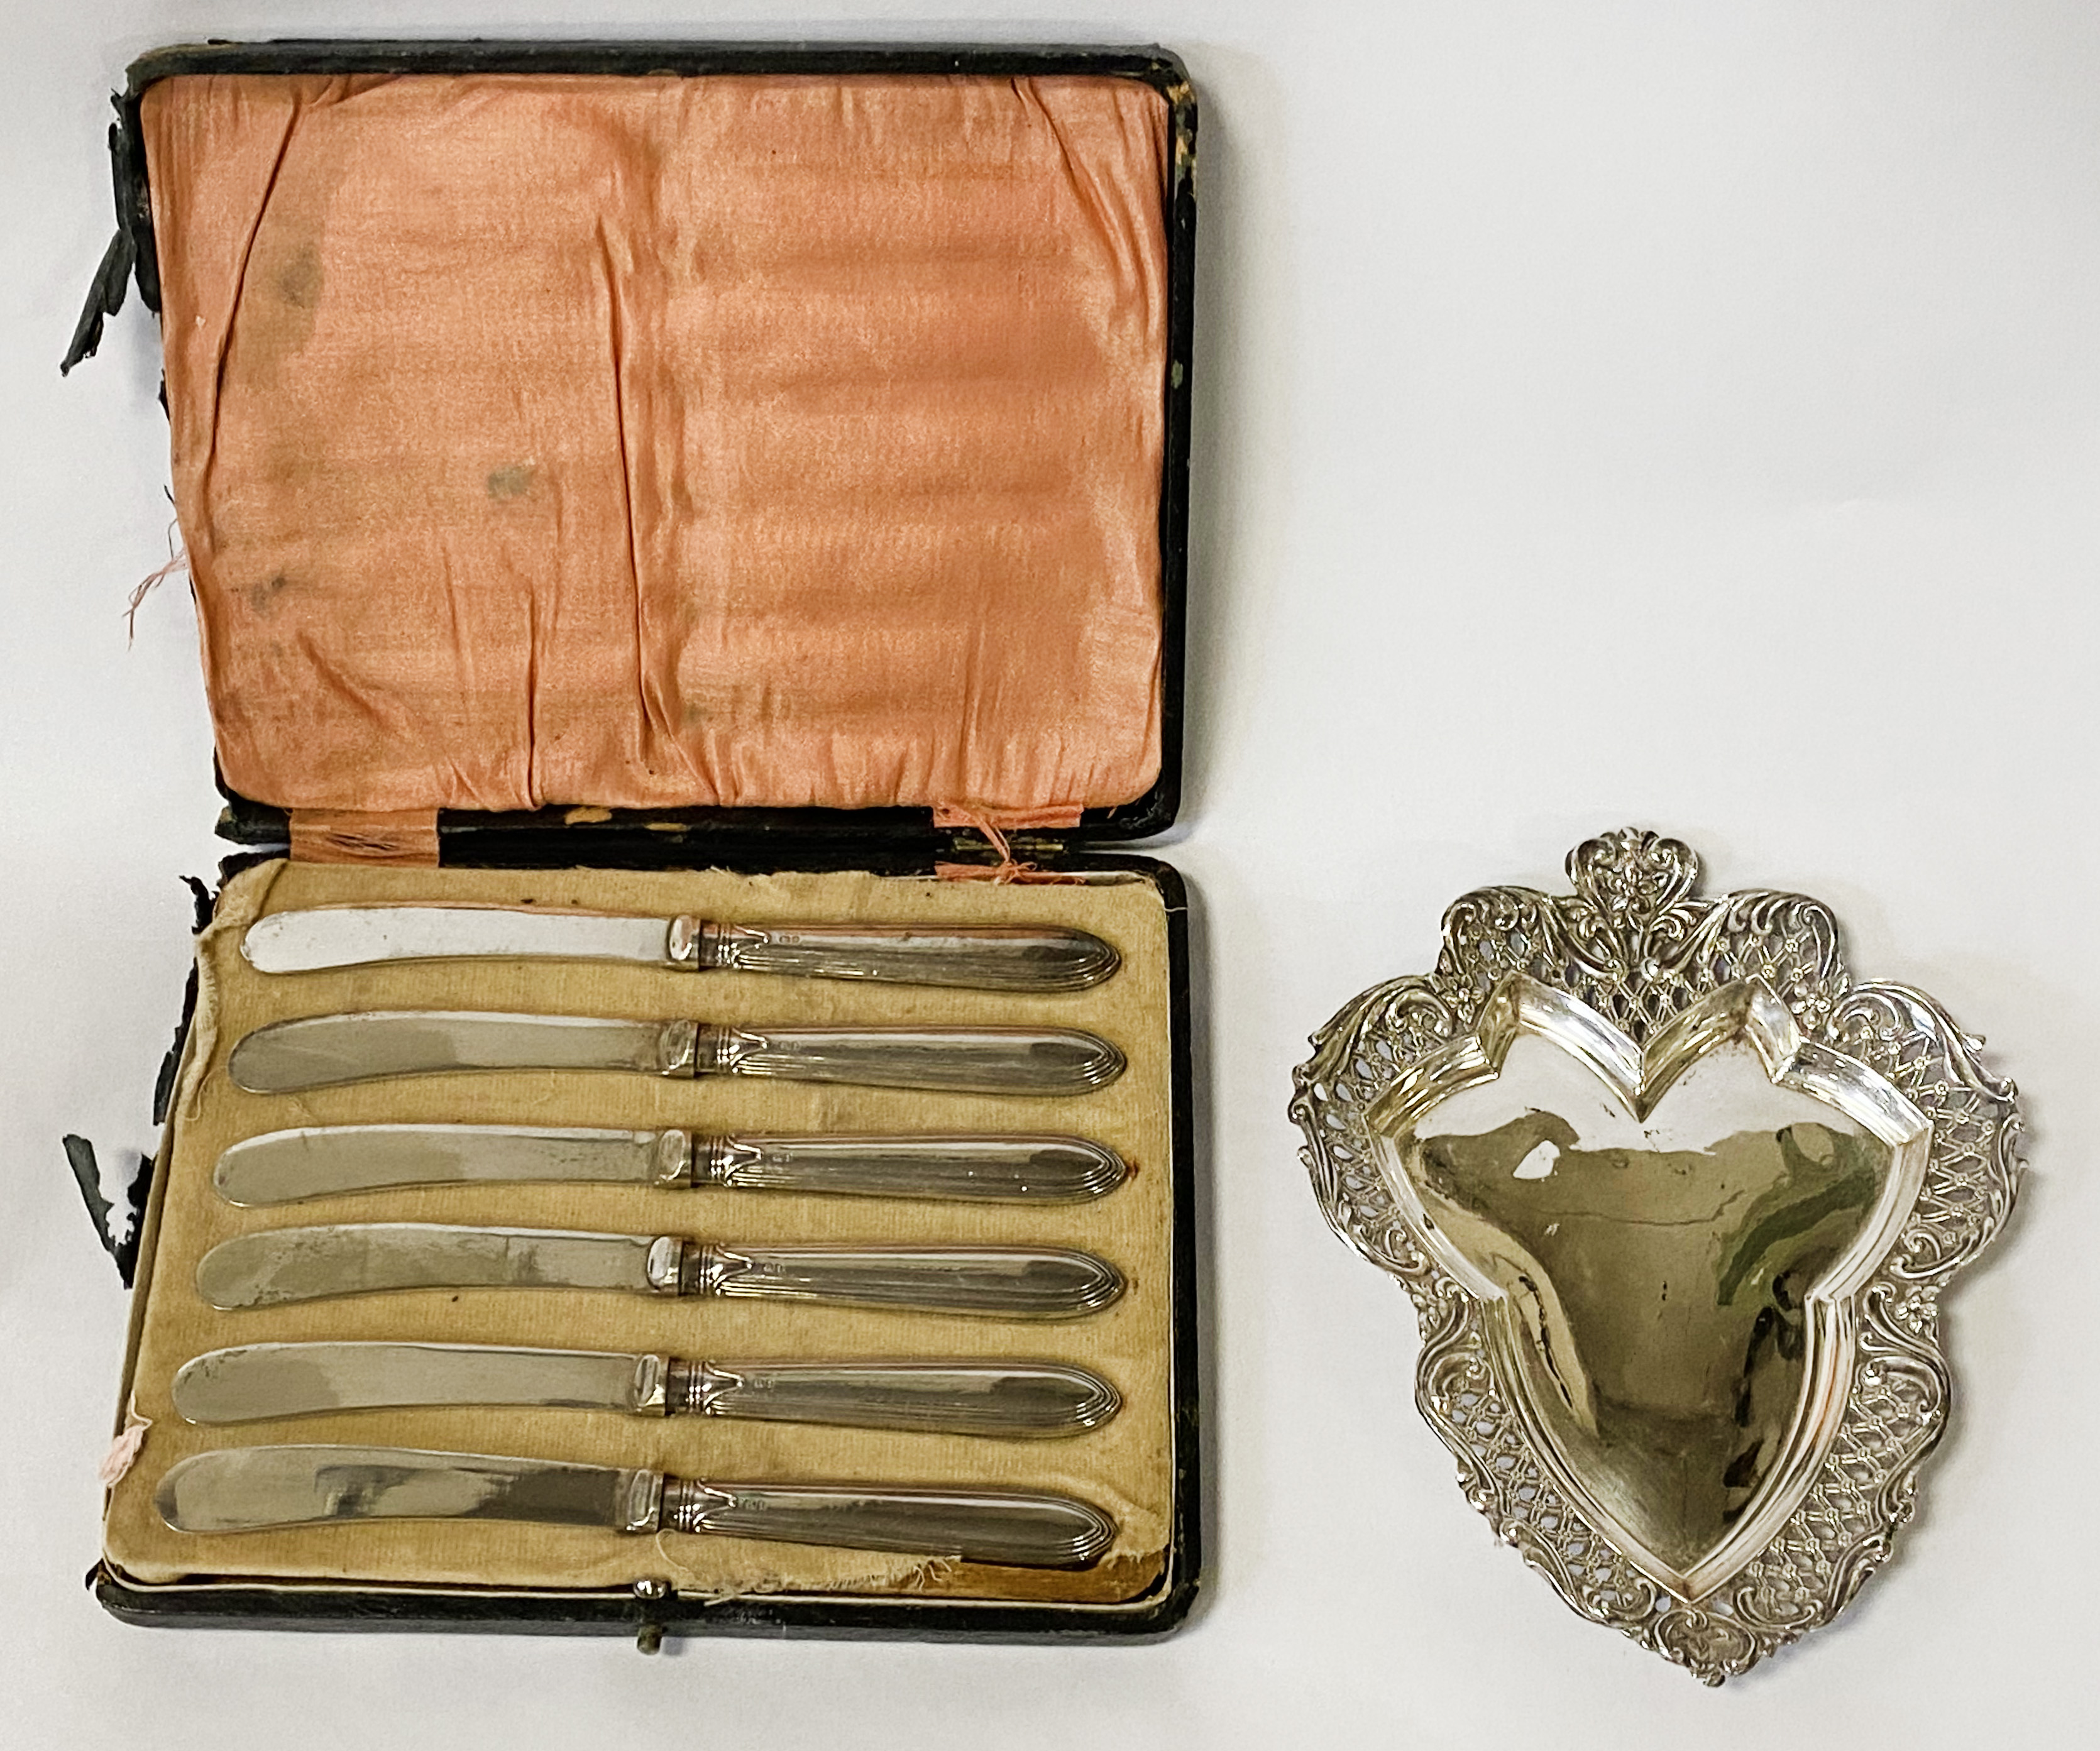 H/M SILVER GALLERY TRAY & 6 H/M SILVER BUTTER KNIVES 8OZ APPROX